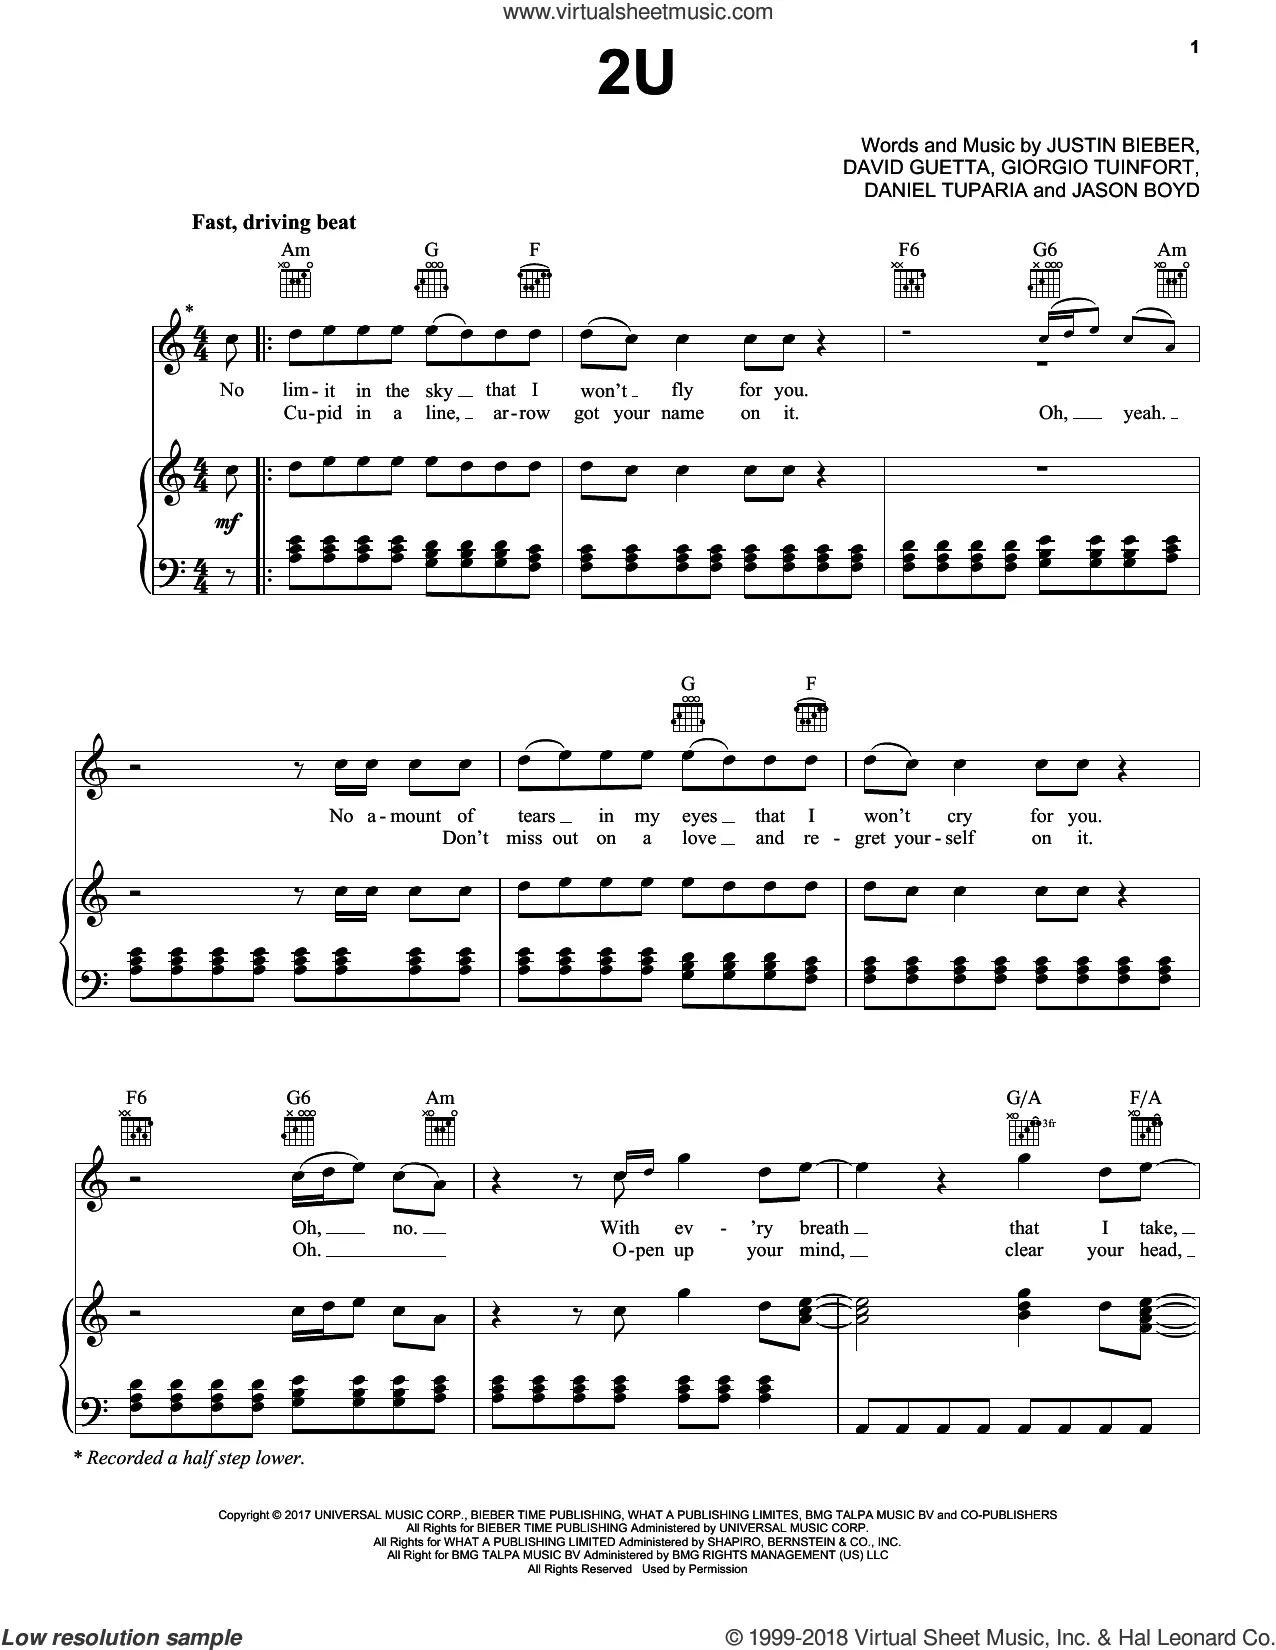 Justin Bieber: Ghost sheet music for voice, piano or guitar (PDF)